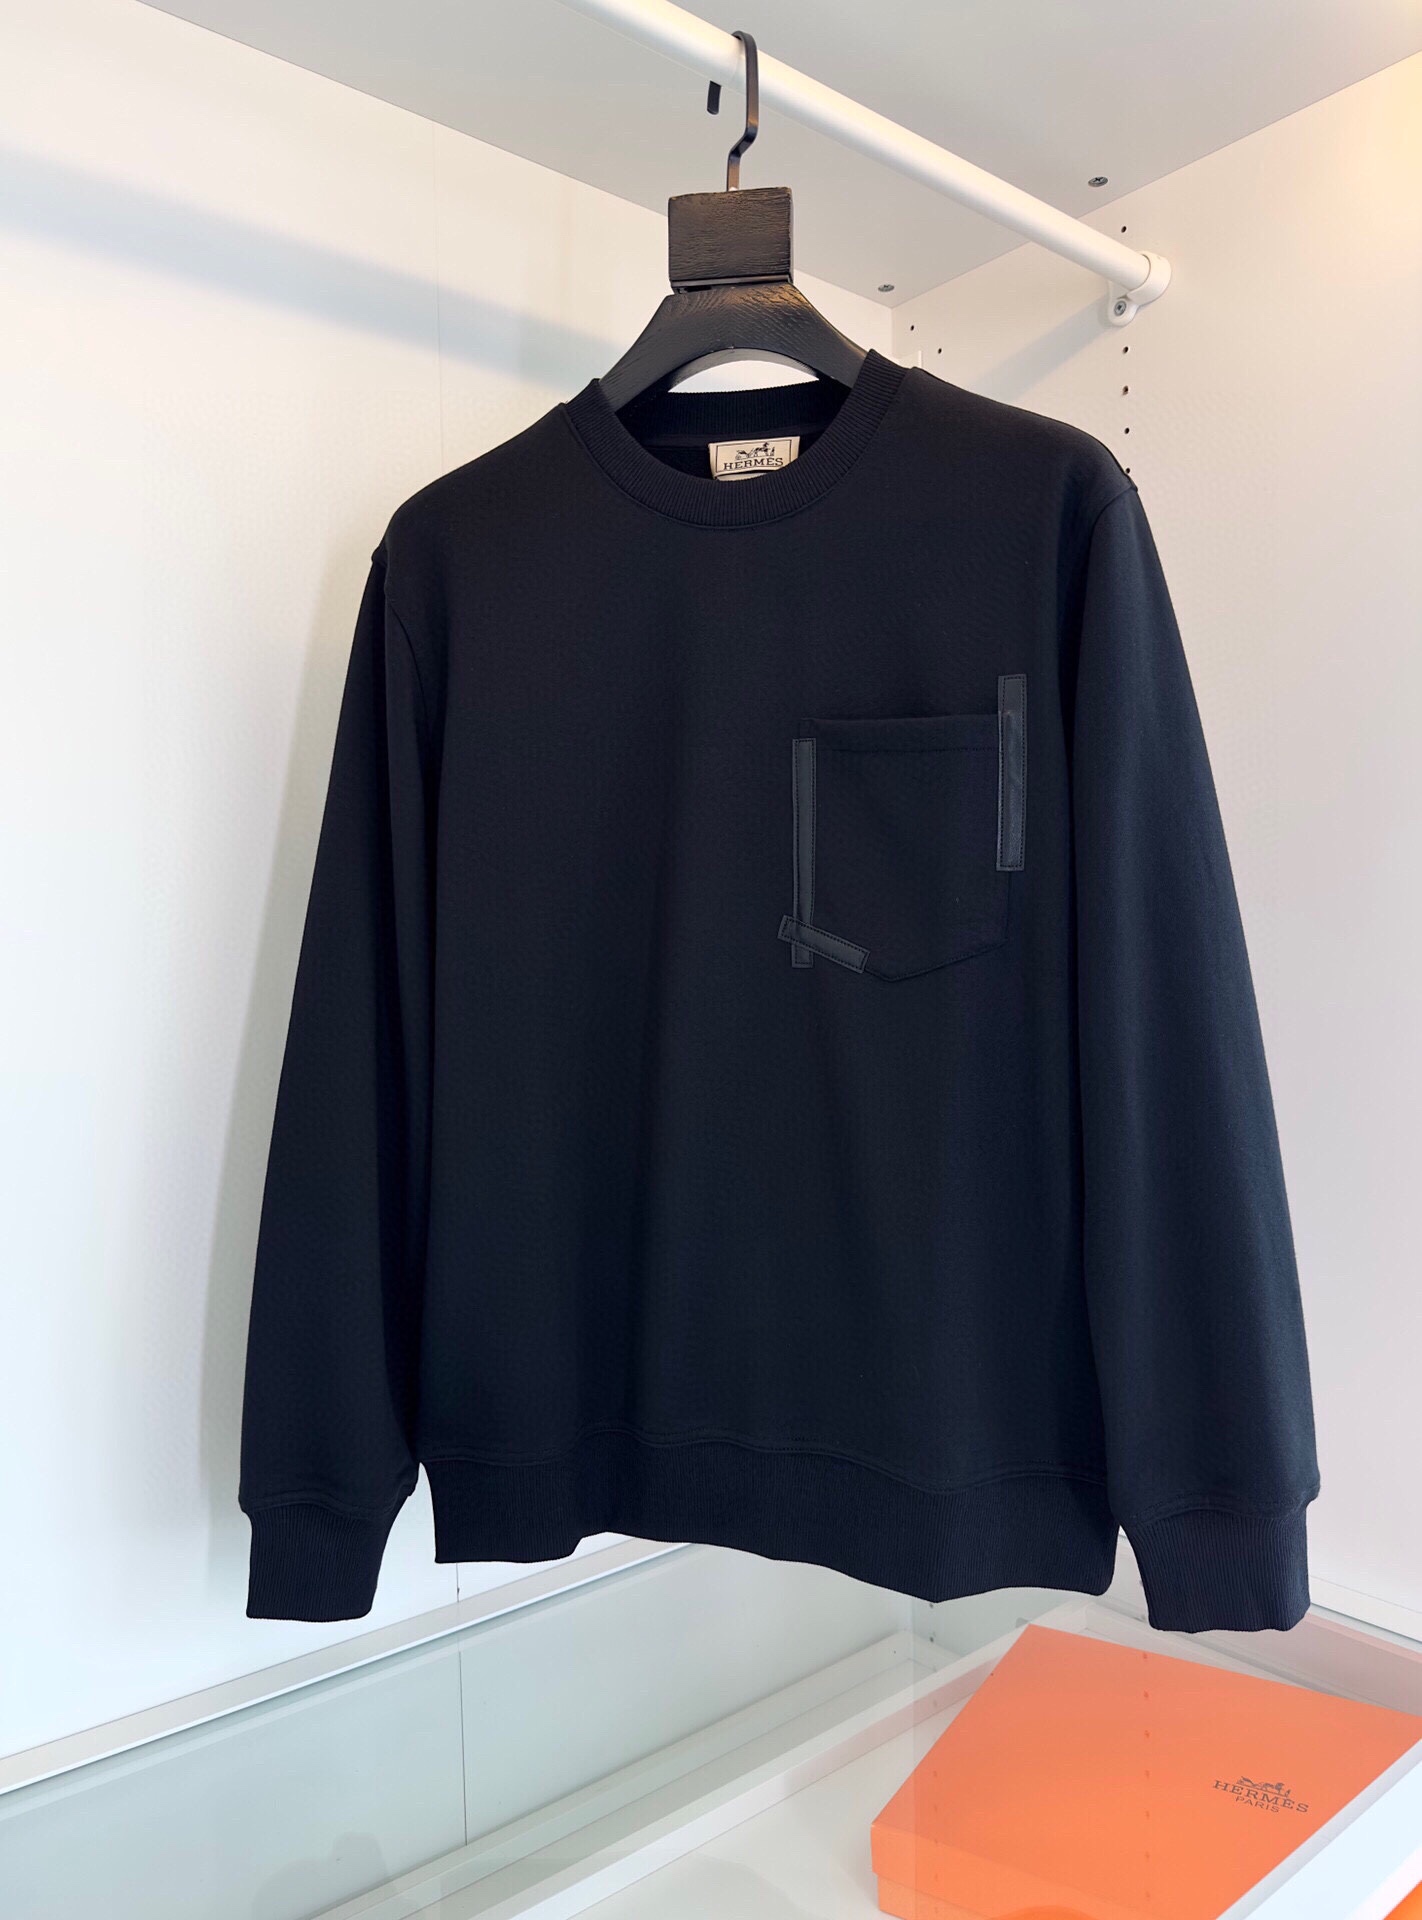 Hermes Clothing Sweatshirts Black Green Orange White Combed Cotton Fall Collection Casual P5285235